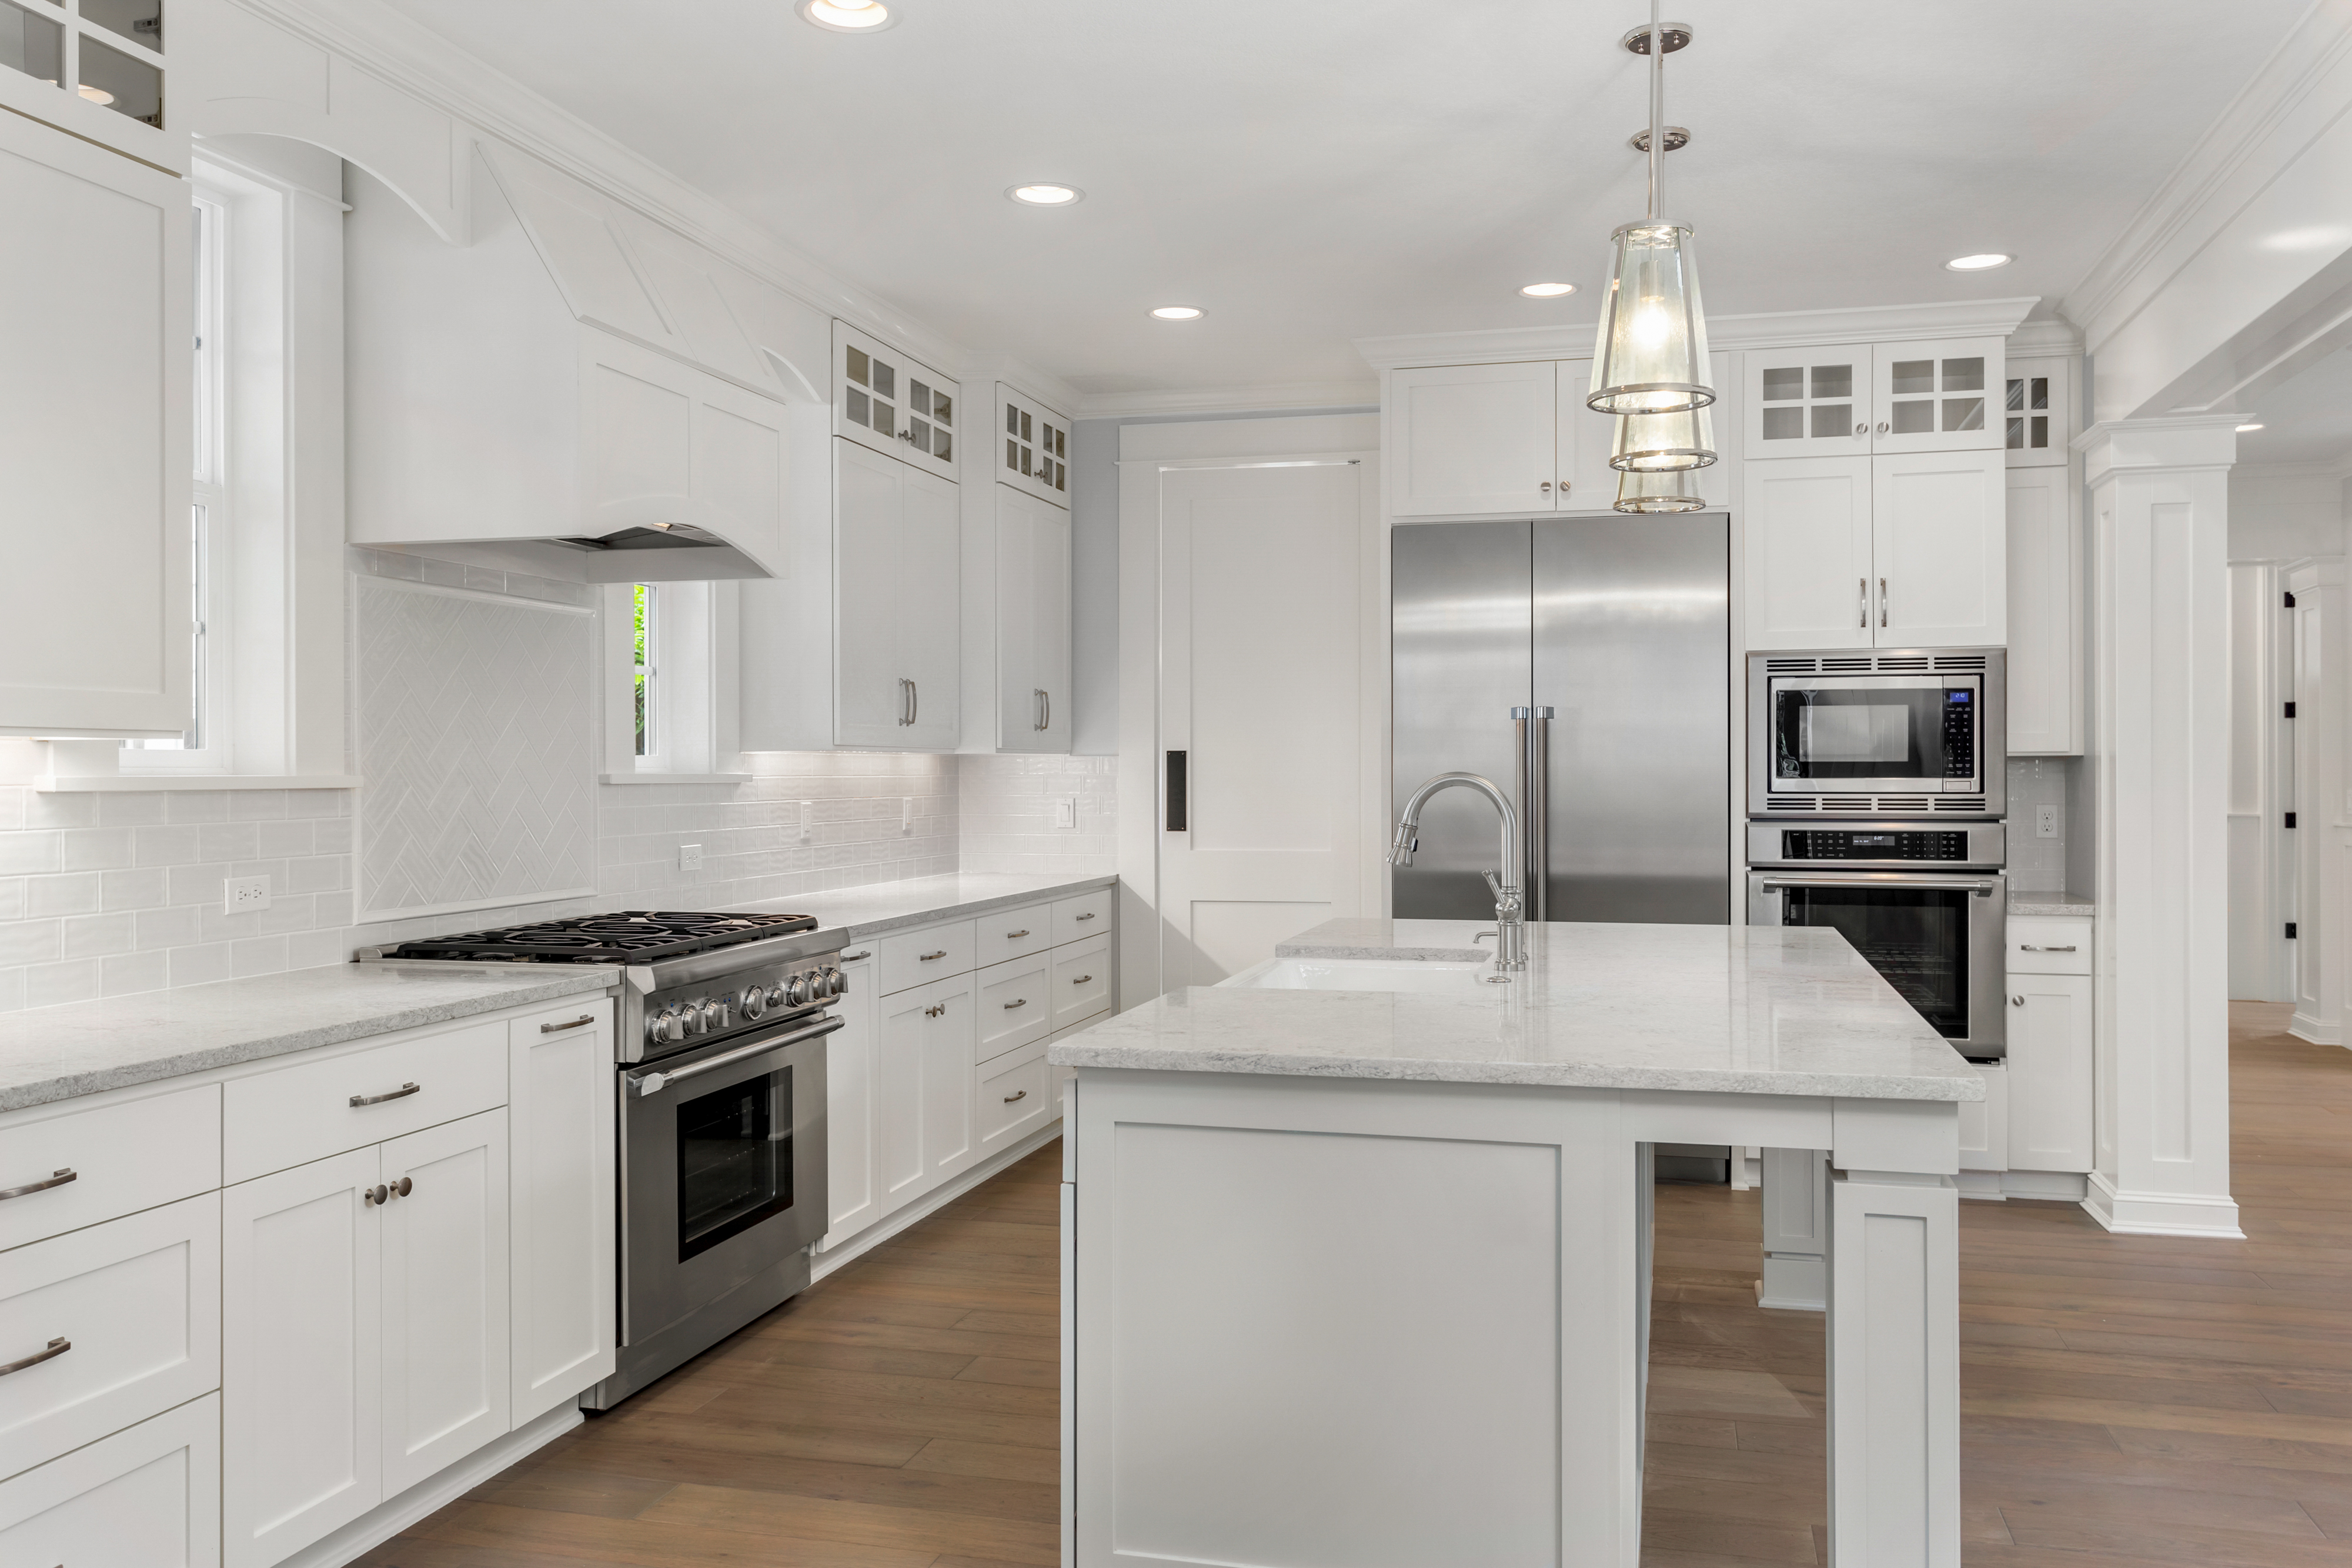 Differences Between Black, White and Stainless Steel Appliances